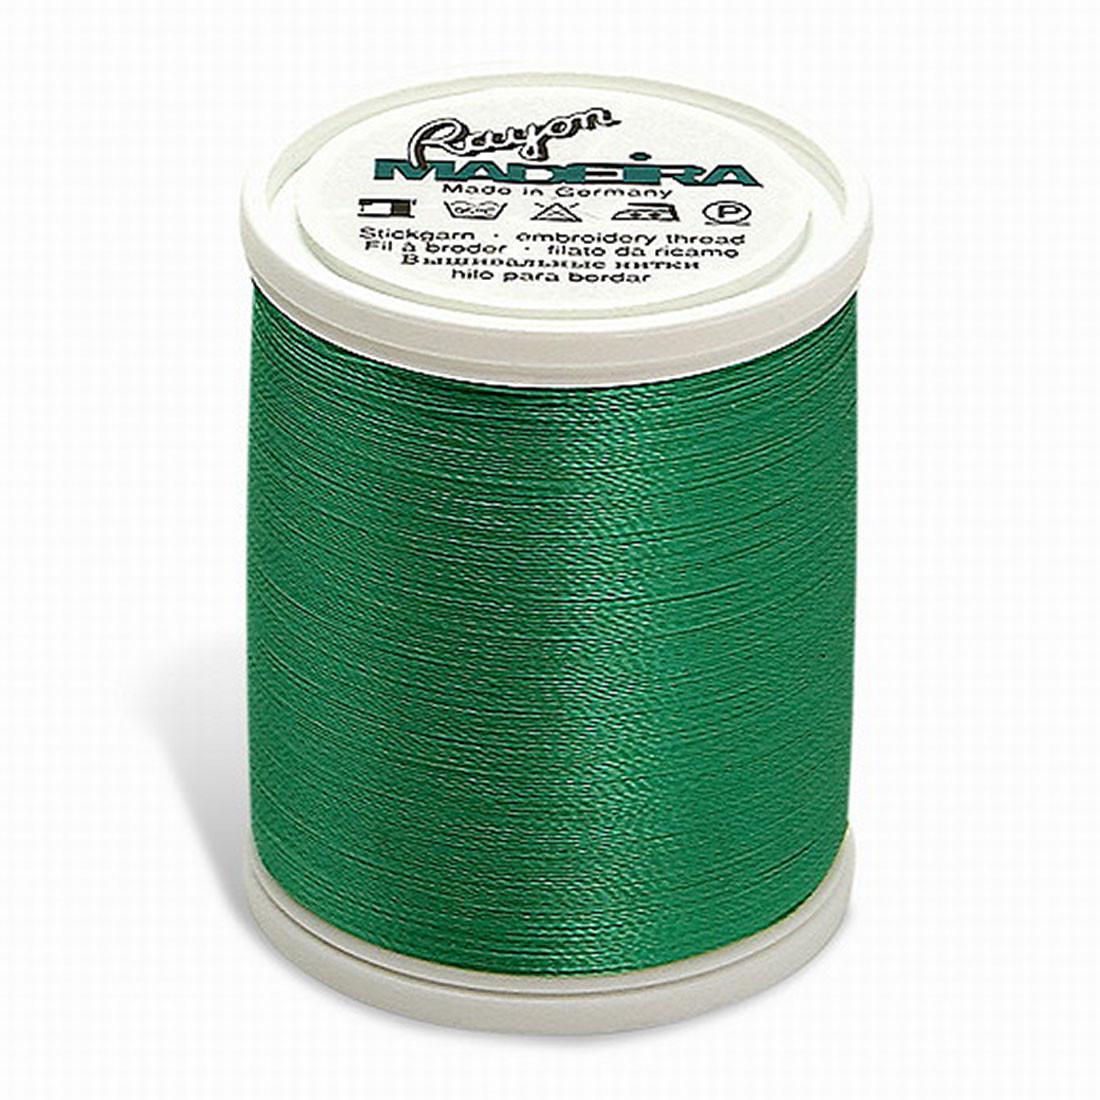 Madeira Rayon 1100YD Color 9841 - Ivy Green - Ready Set Sew TN